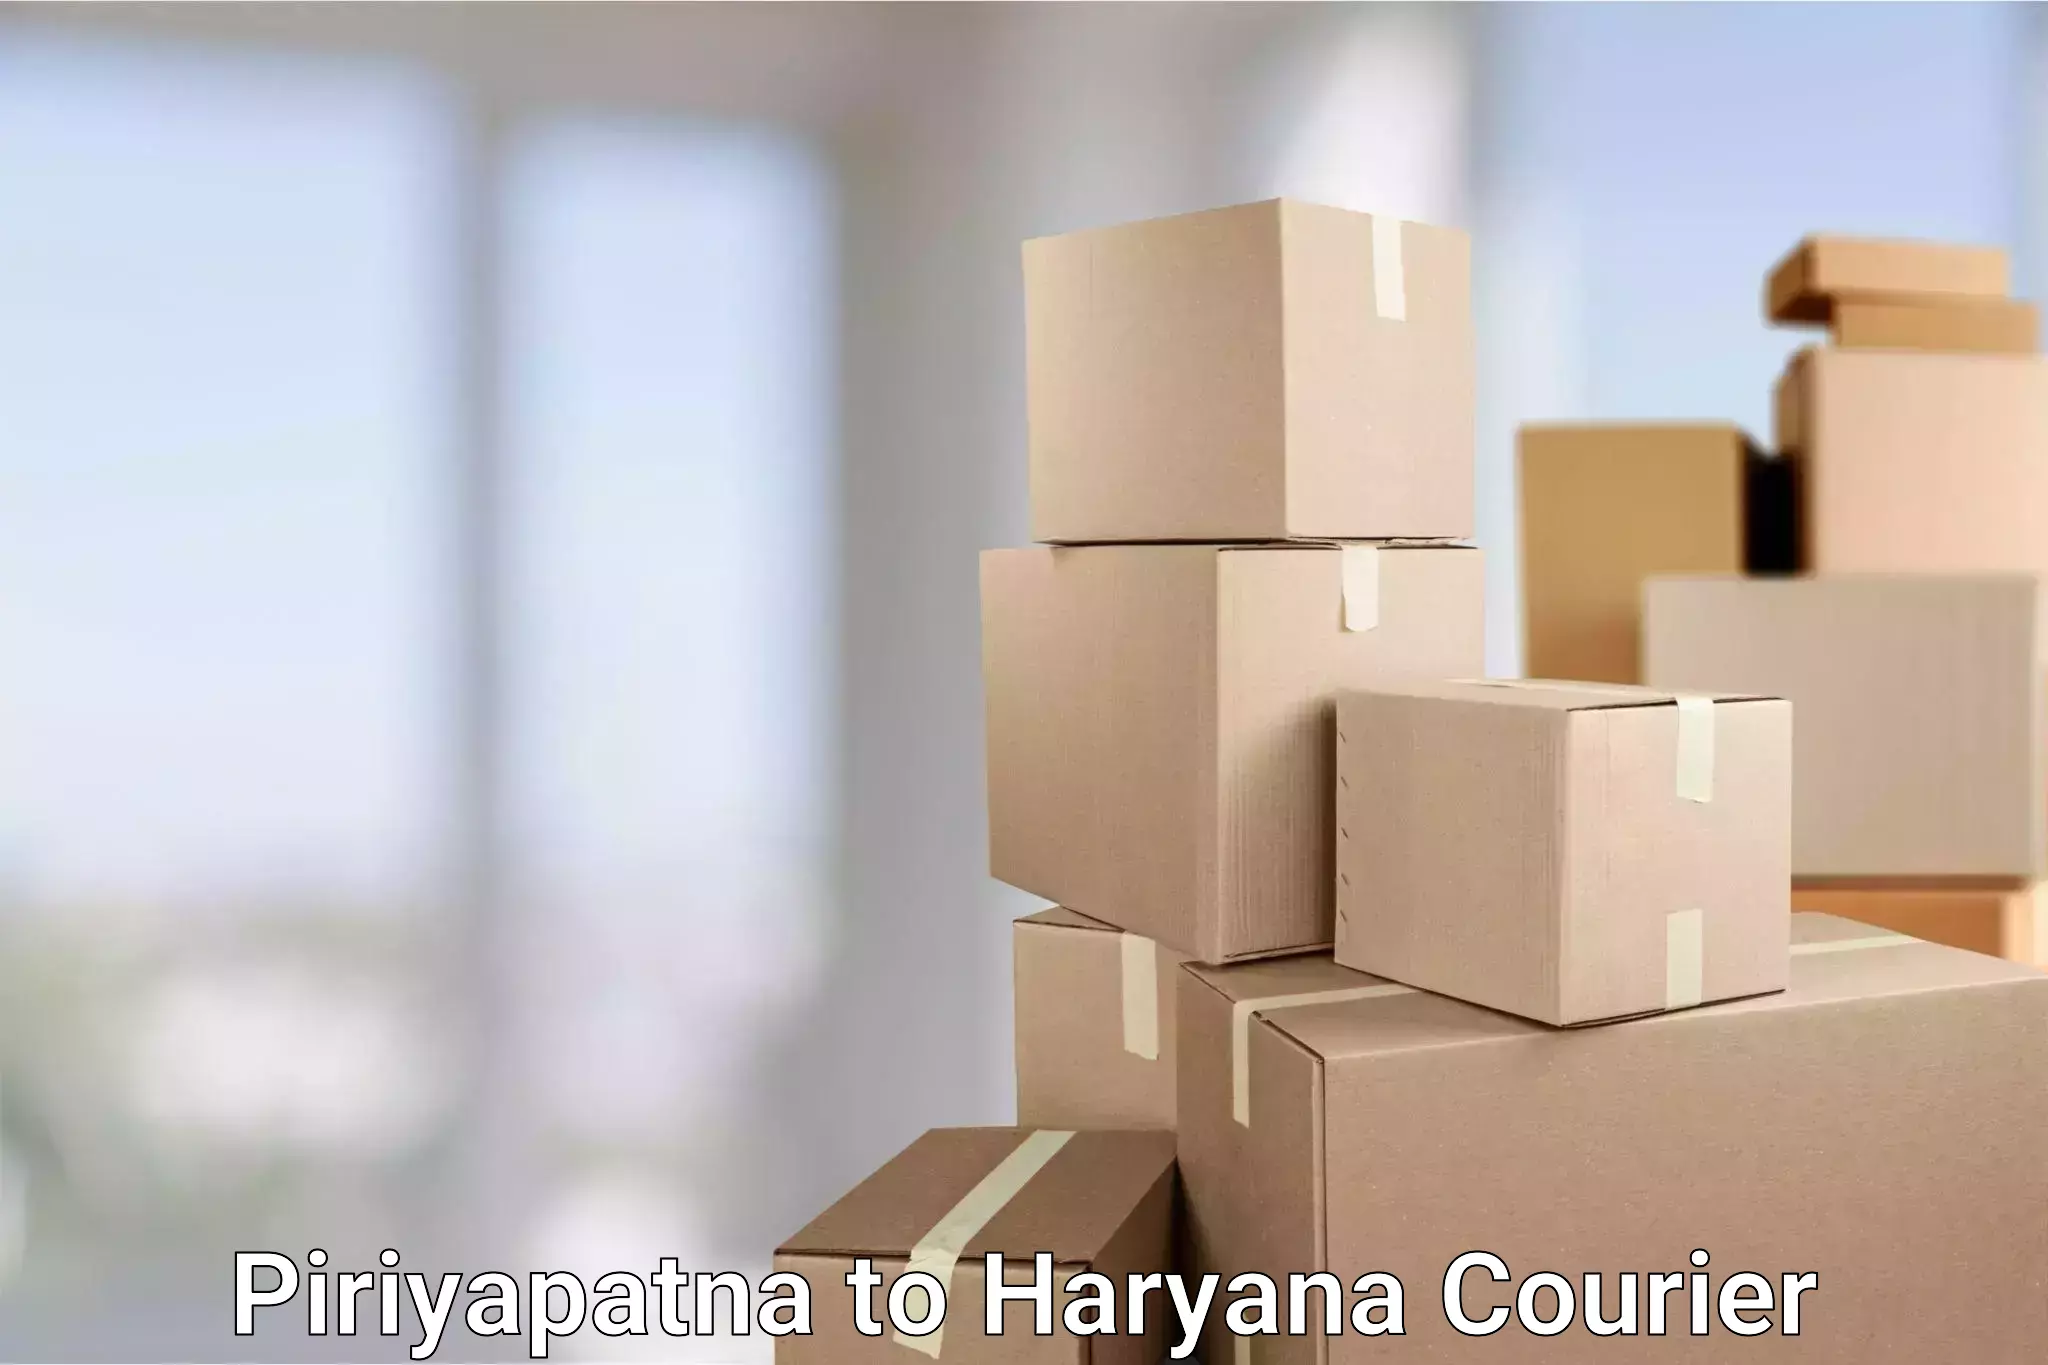 Professional parcel services in Piriyapatna to Haryana